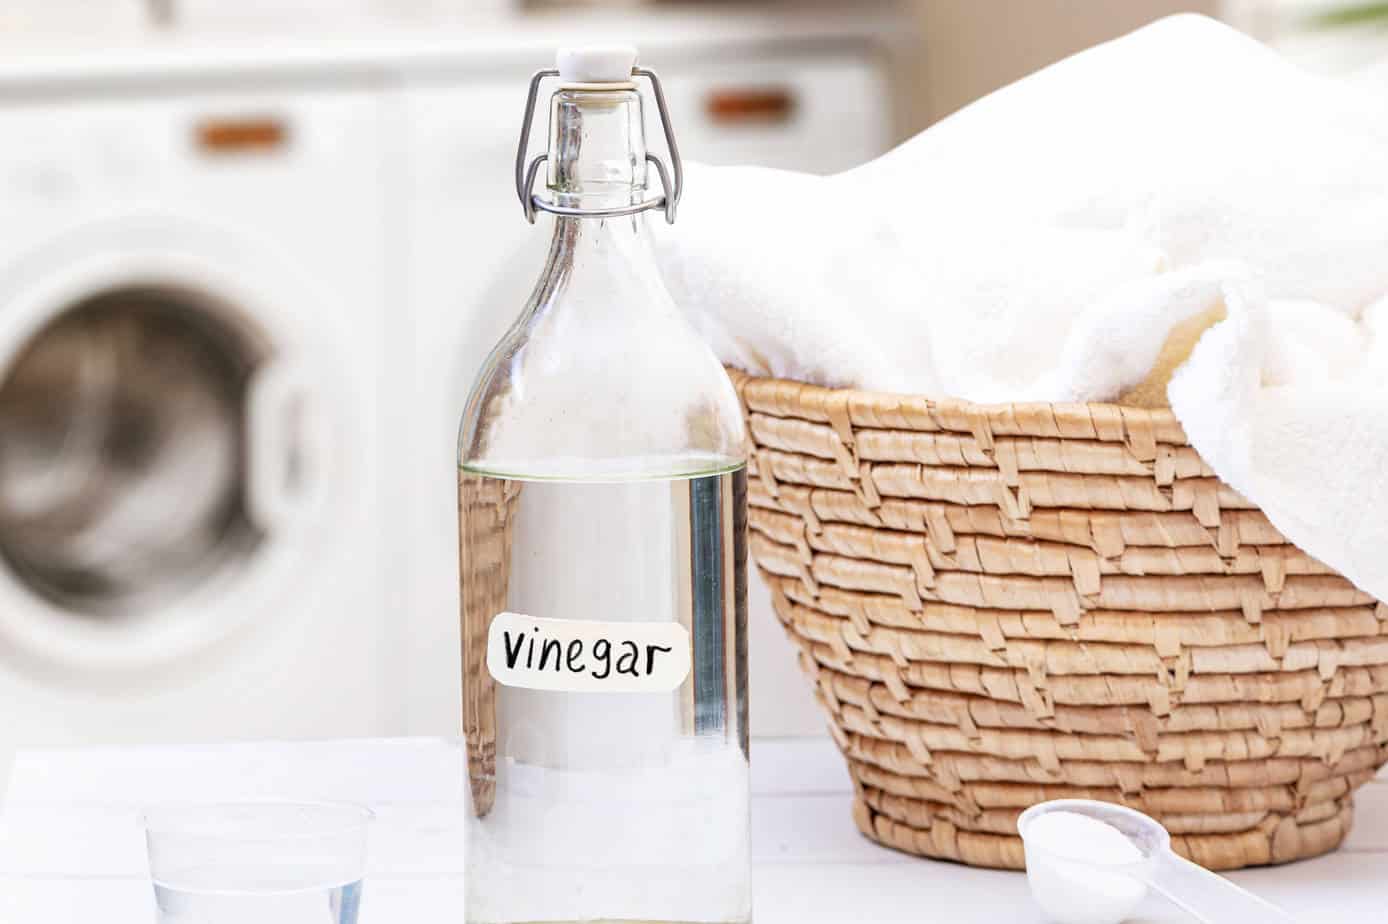 Soften clothes with white vinegar